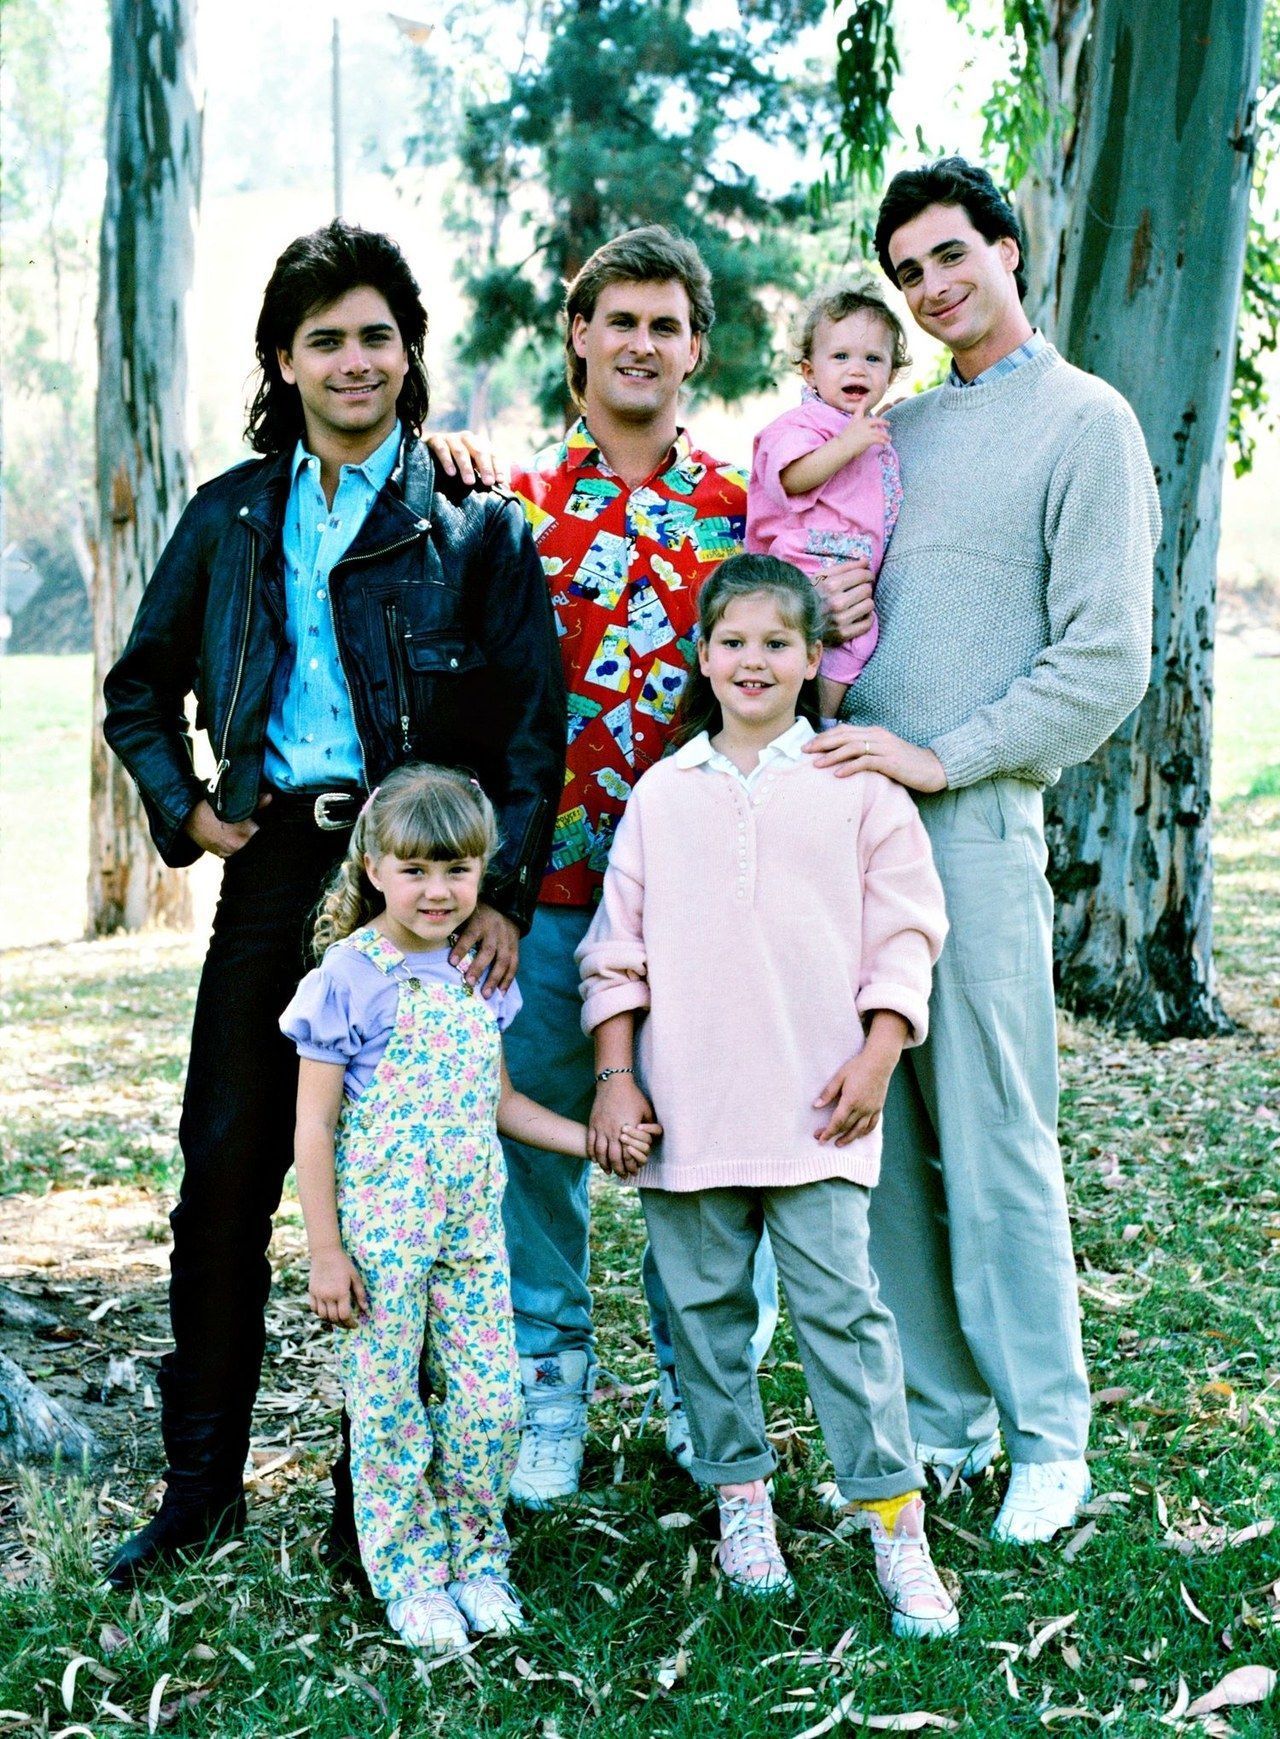 completo house premiere 1987 bob saget john stamos dave coulier jodie sweetin candace cameron olsen twins